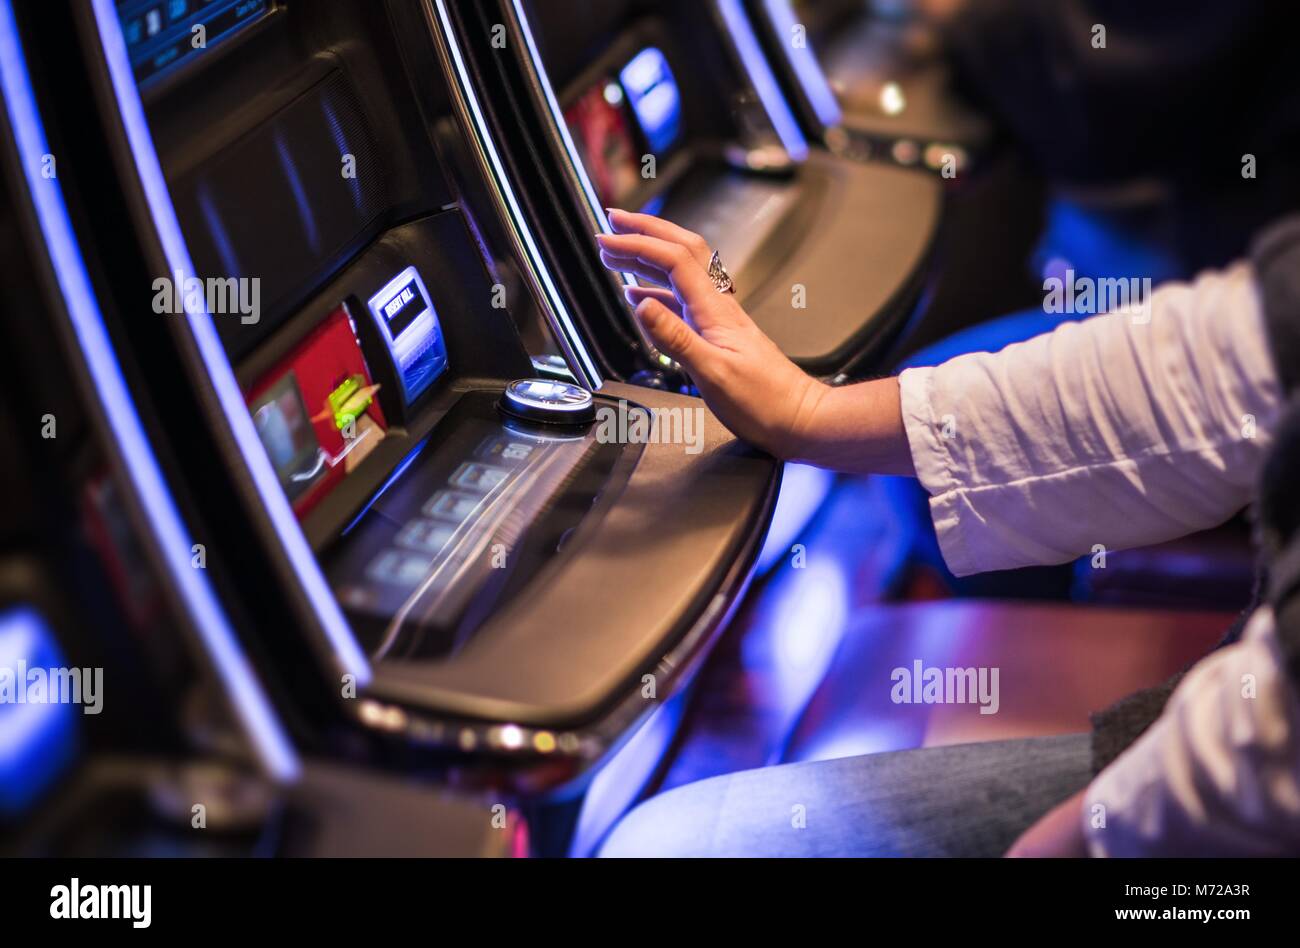 Casino Video Slots Game Playing. Caucasian Woman Feeling Lucky in the Vegas Casino. Stock Photo